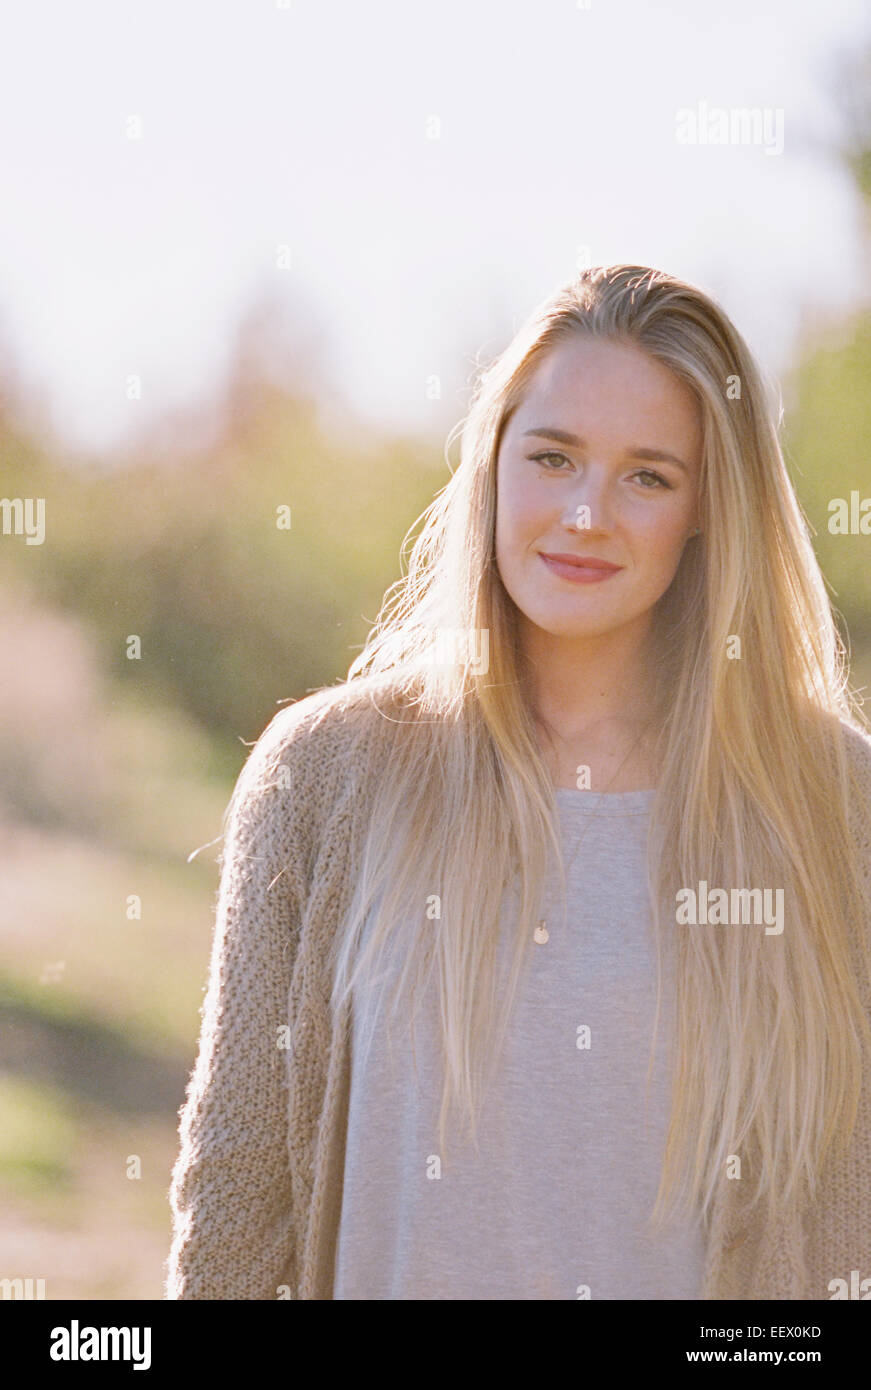 Portrait of a woman with long blond hair. Stock Photo